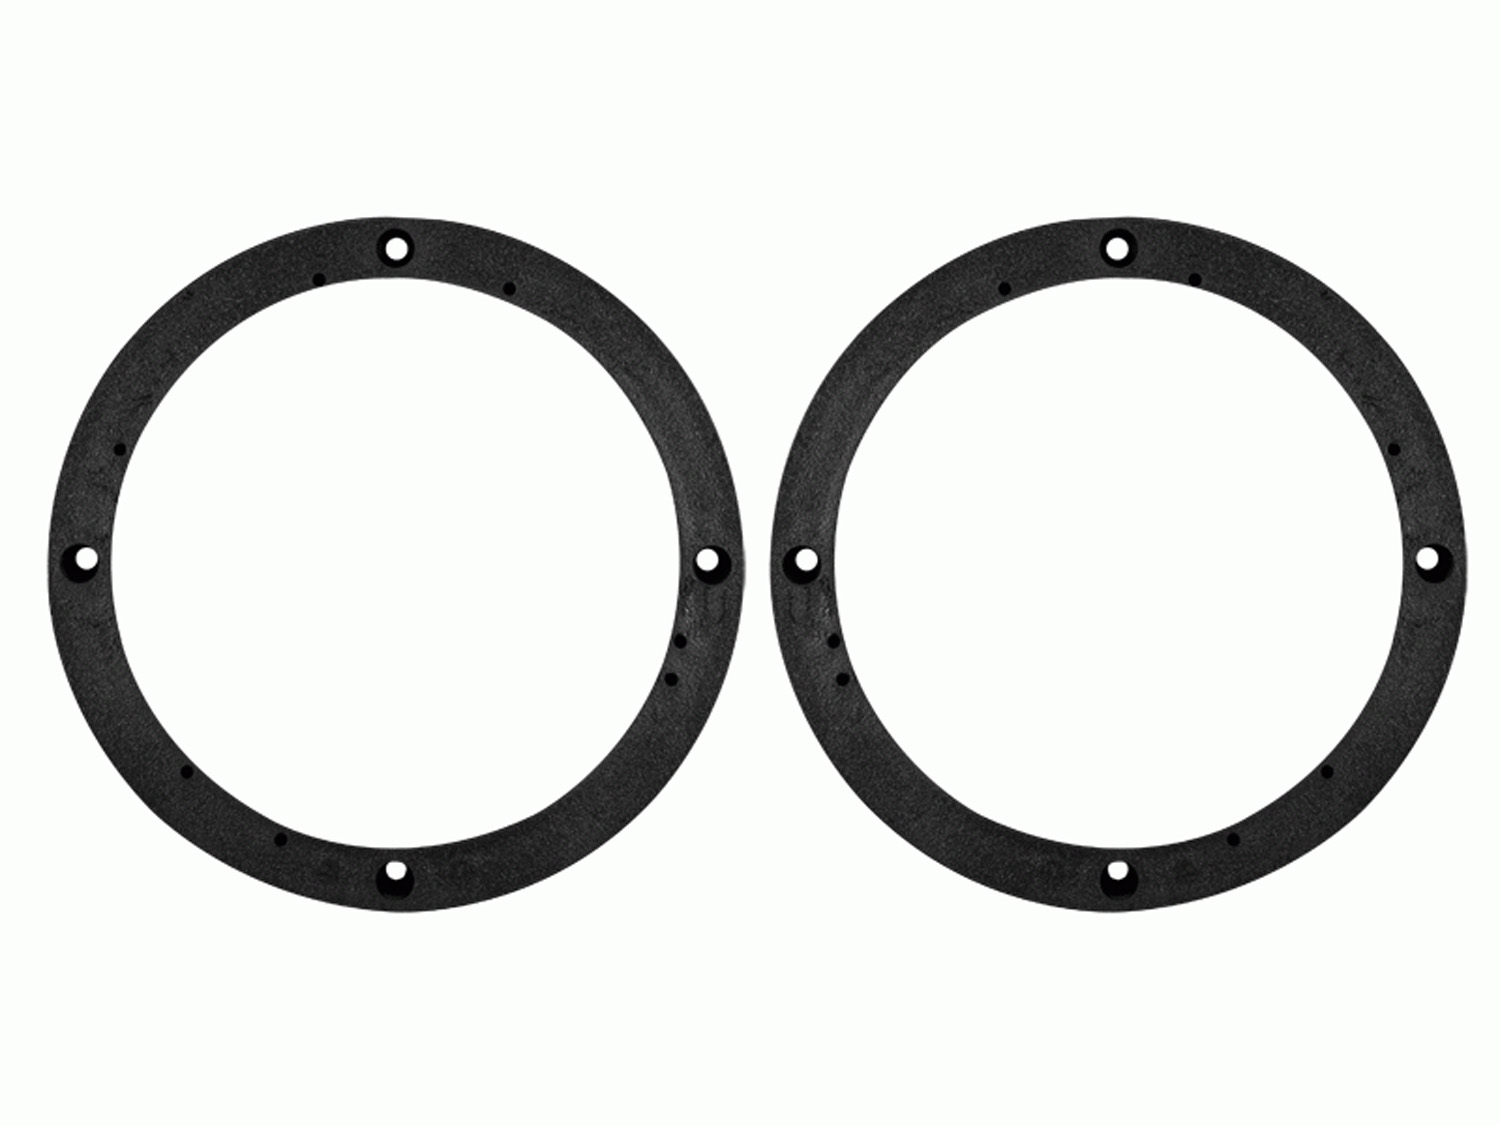 METRA - PAIR OF 1" UNIVERSAL SPEAKER SPACER RINGS FOR 5-1/4", 6" & 6-1/2" ROUND SPEAKERS, PROVIDES 1" EXTRA MOUNTING DEPTH